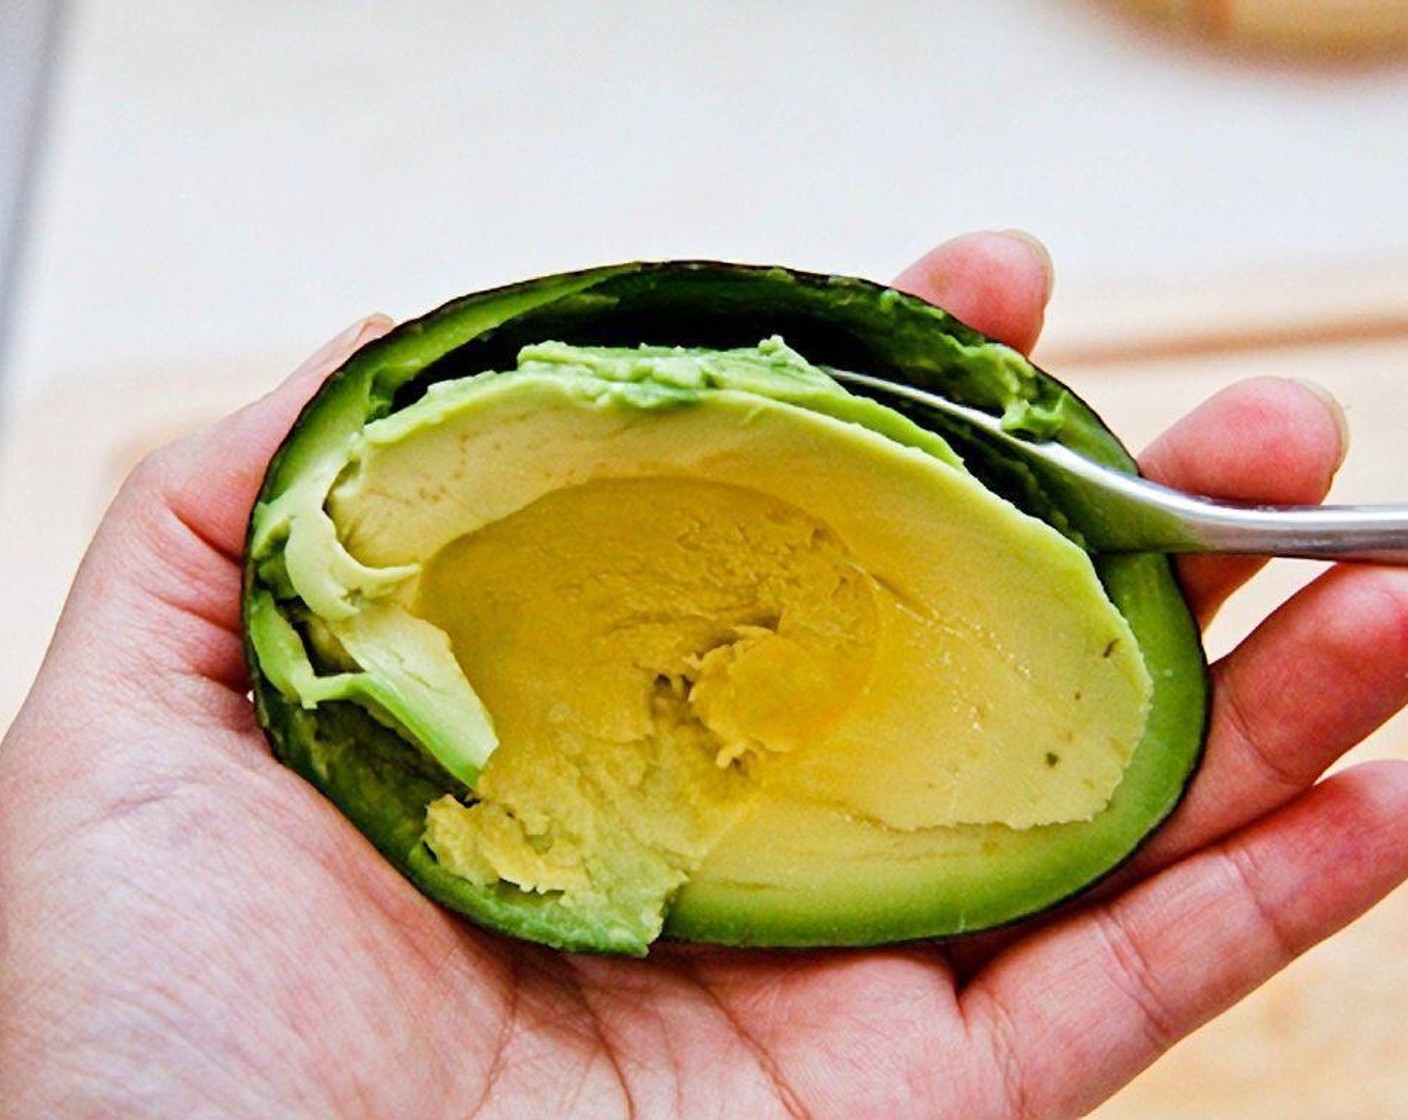 step 4 For the second combination, use avocado and turkey. Pit and scoop the Avocado (1).